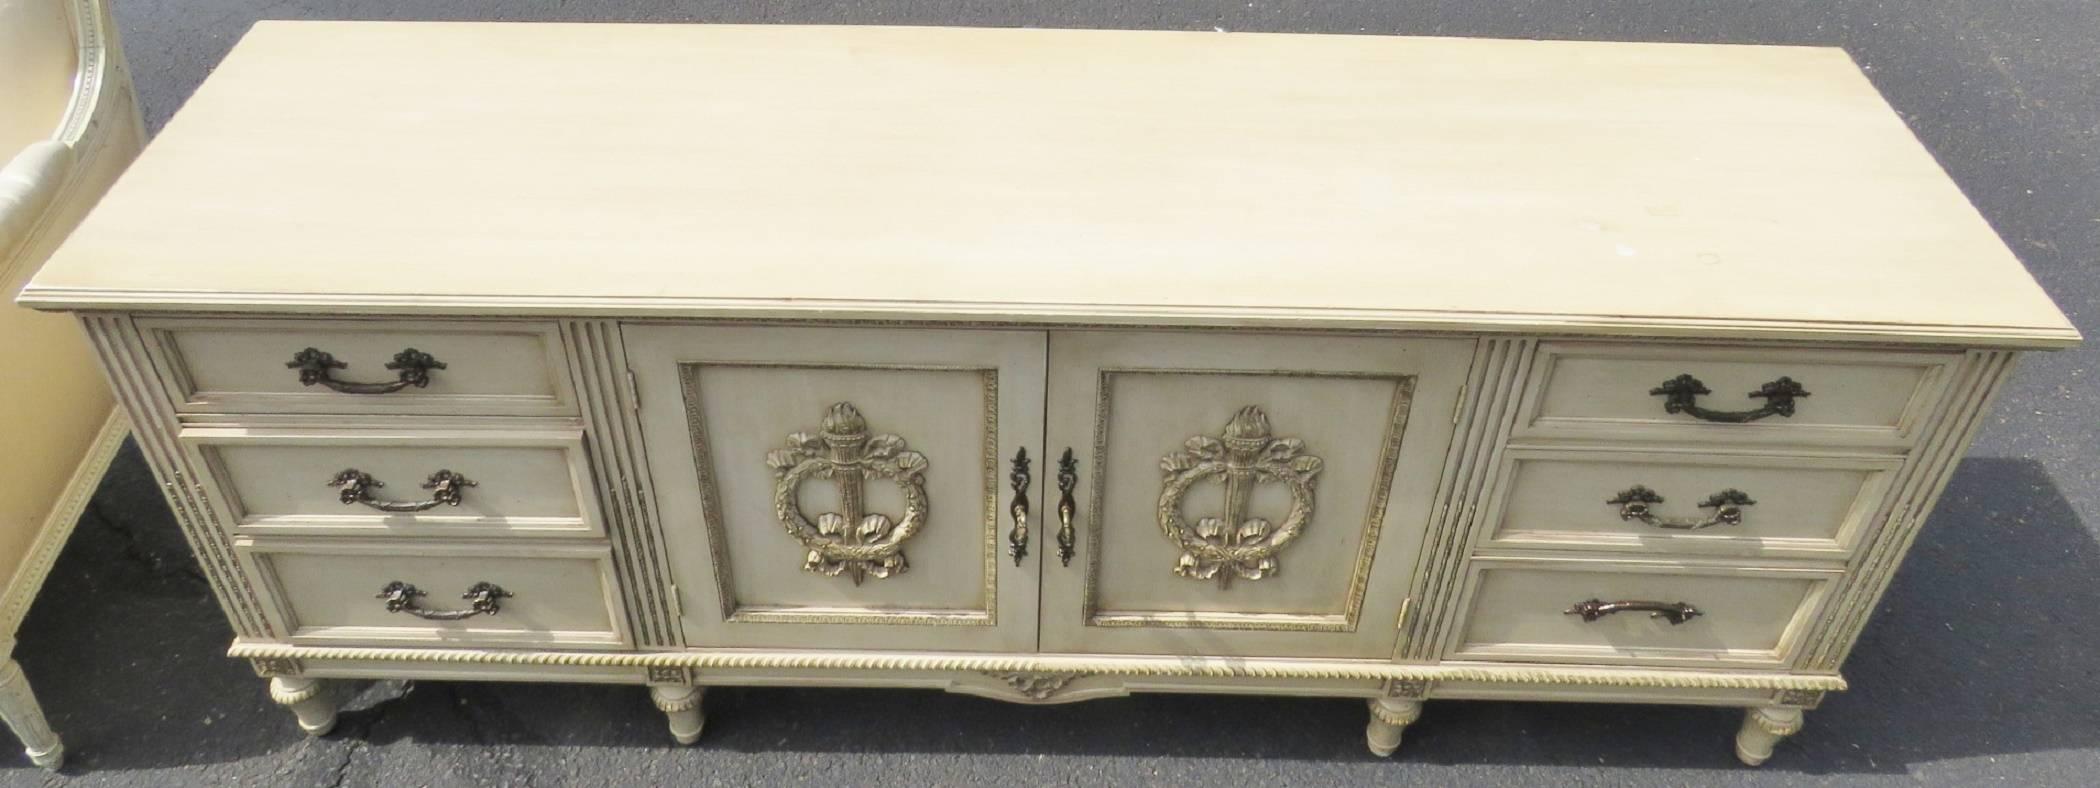 Davis Swedish Style Distressed Cream Painted Carved Sideboard 4